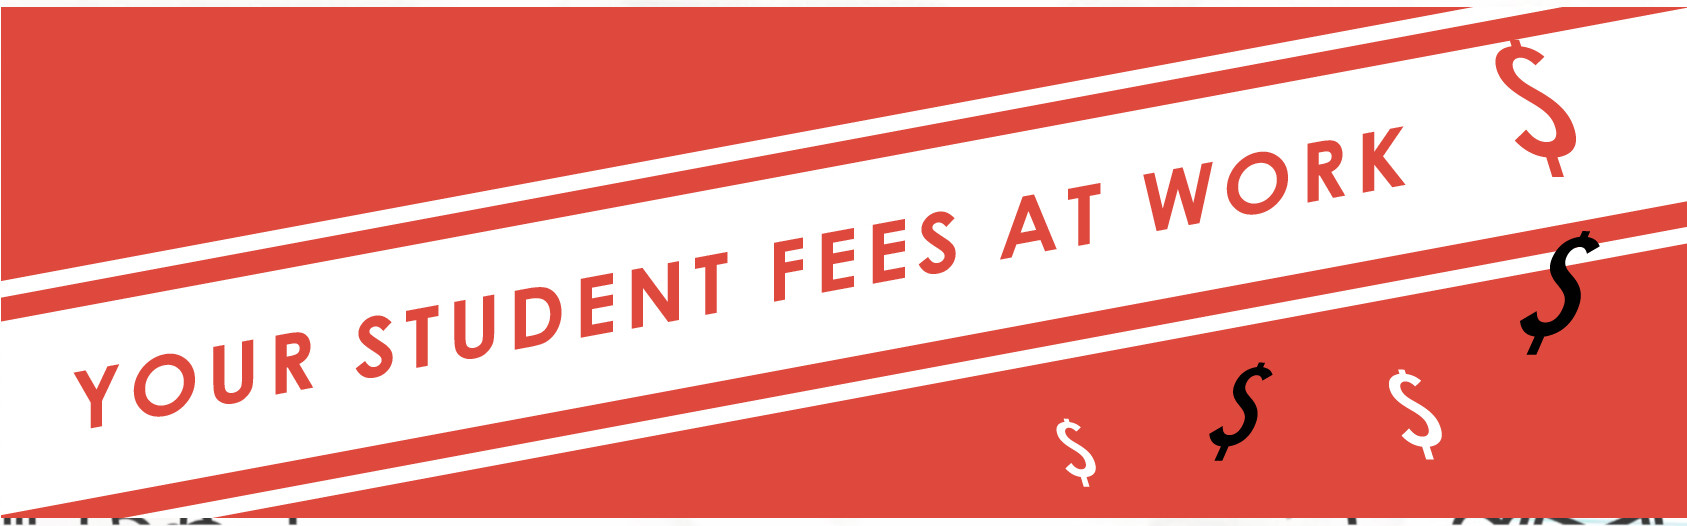 Your USU Student Fees At Work Banner